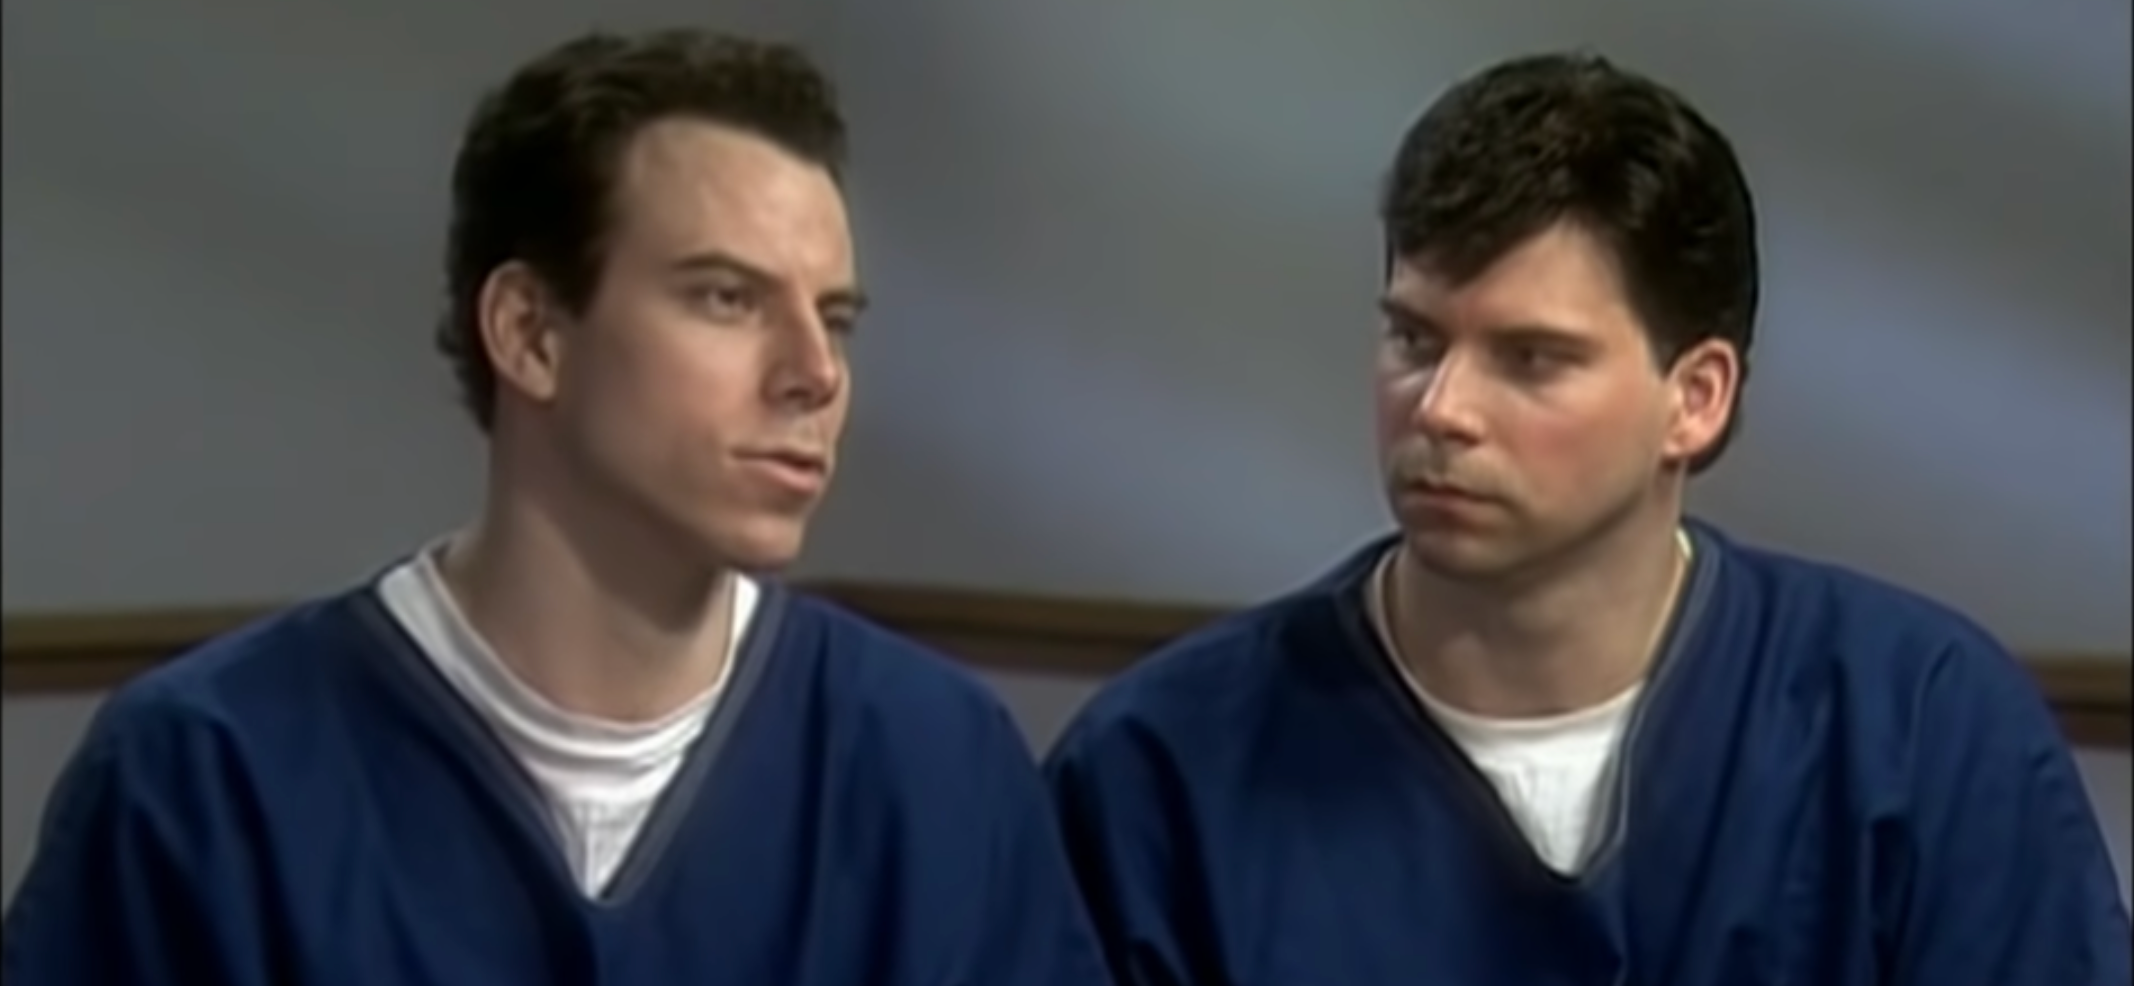 Will The Menendez Brothers Case Reopen After Rape Allegations Against Dad Surface?